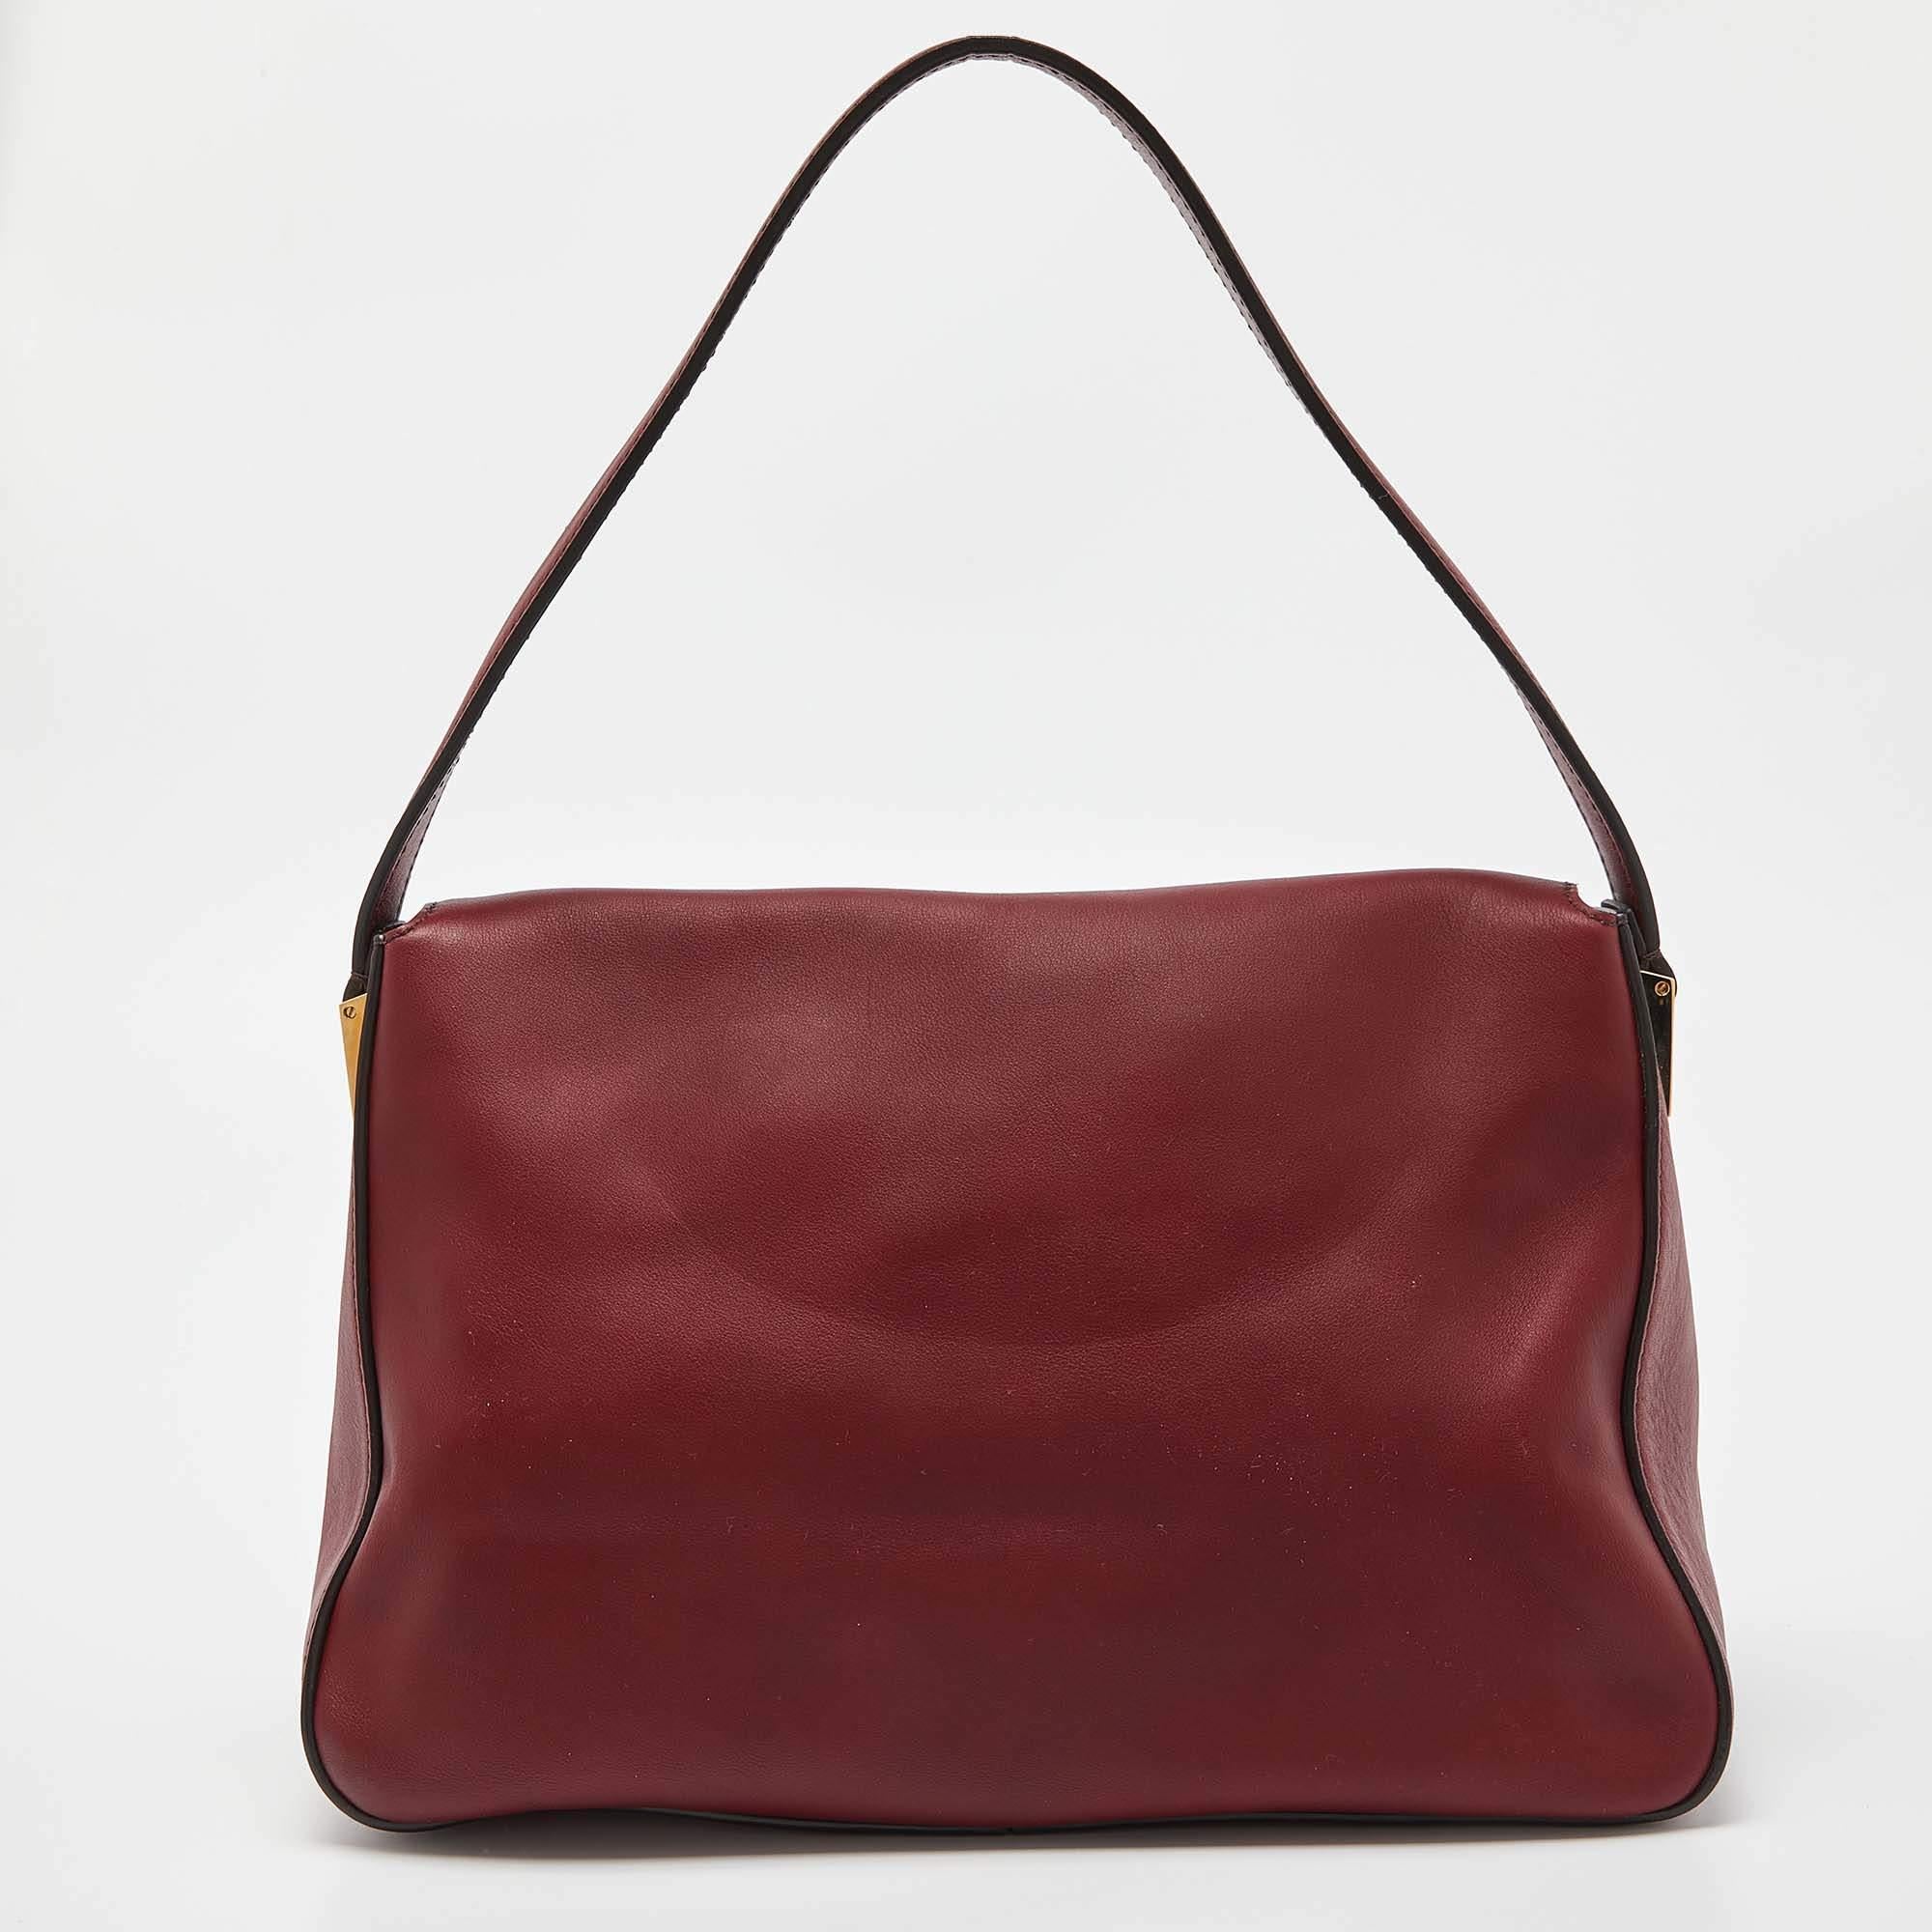 The Mama Forever shoulder bag from Fendi is a classic fashion choice. Detailed with their logo lock on the flap, this dark red leather piece is simple and stylish. A well-sized fabric interior and a leather handle complete the bag.

Includes: